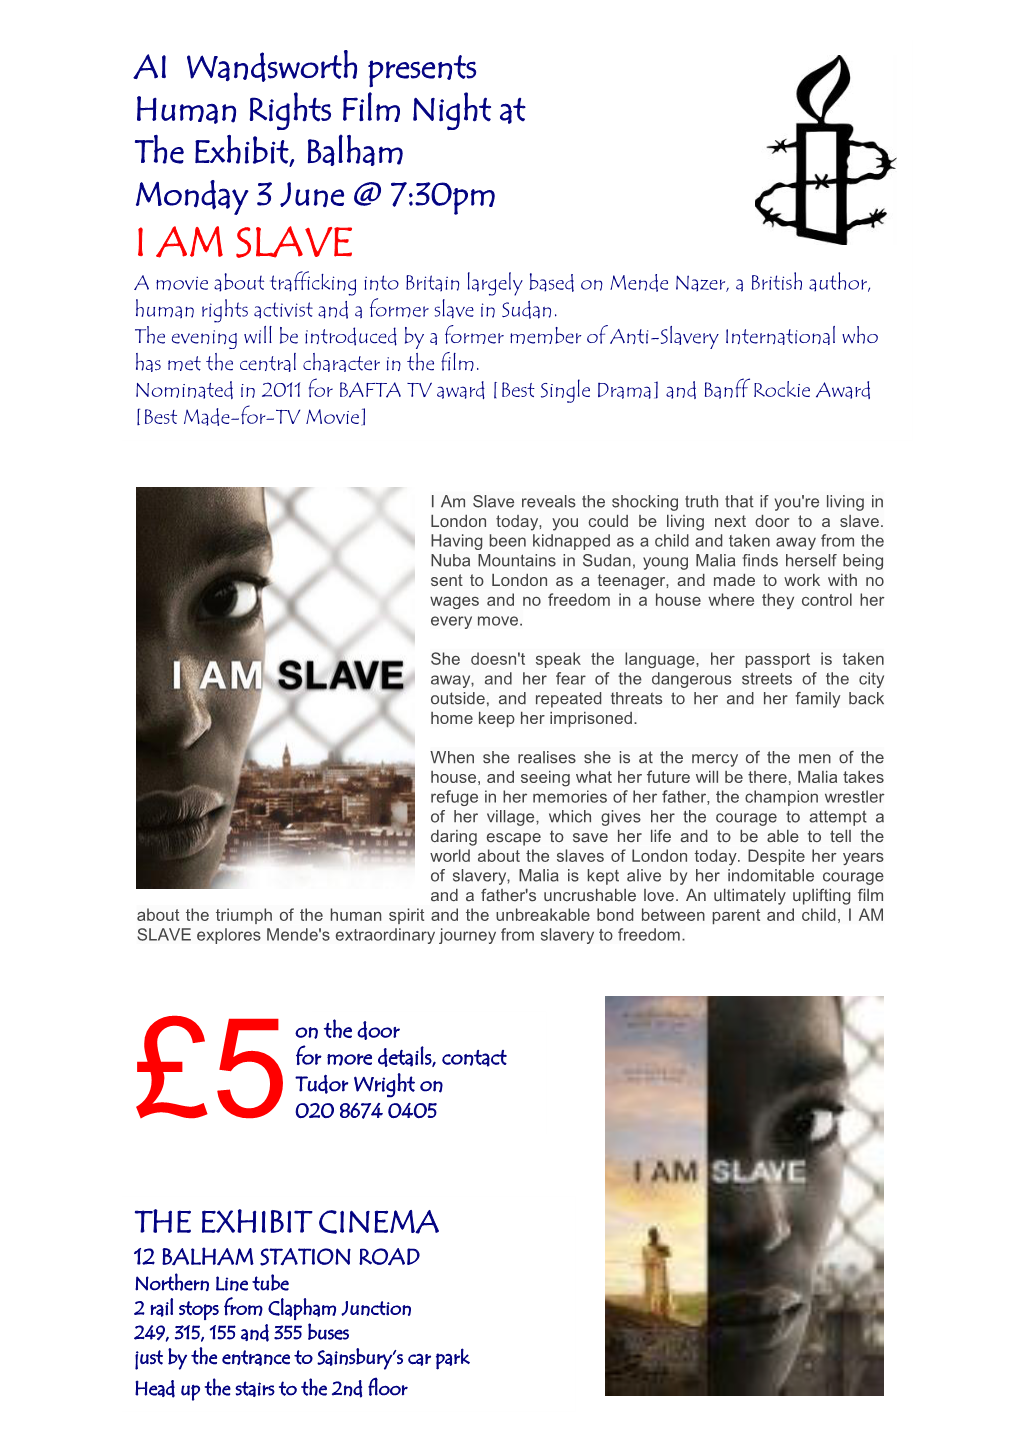 I AM SLAVE a Movie About Trafficking Into Britain Largely Based on Mende Nazer, a British Author, Human Rights Activist and a Former Slave in Sudan